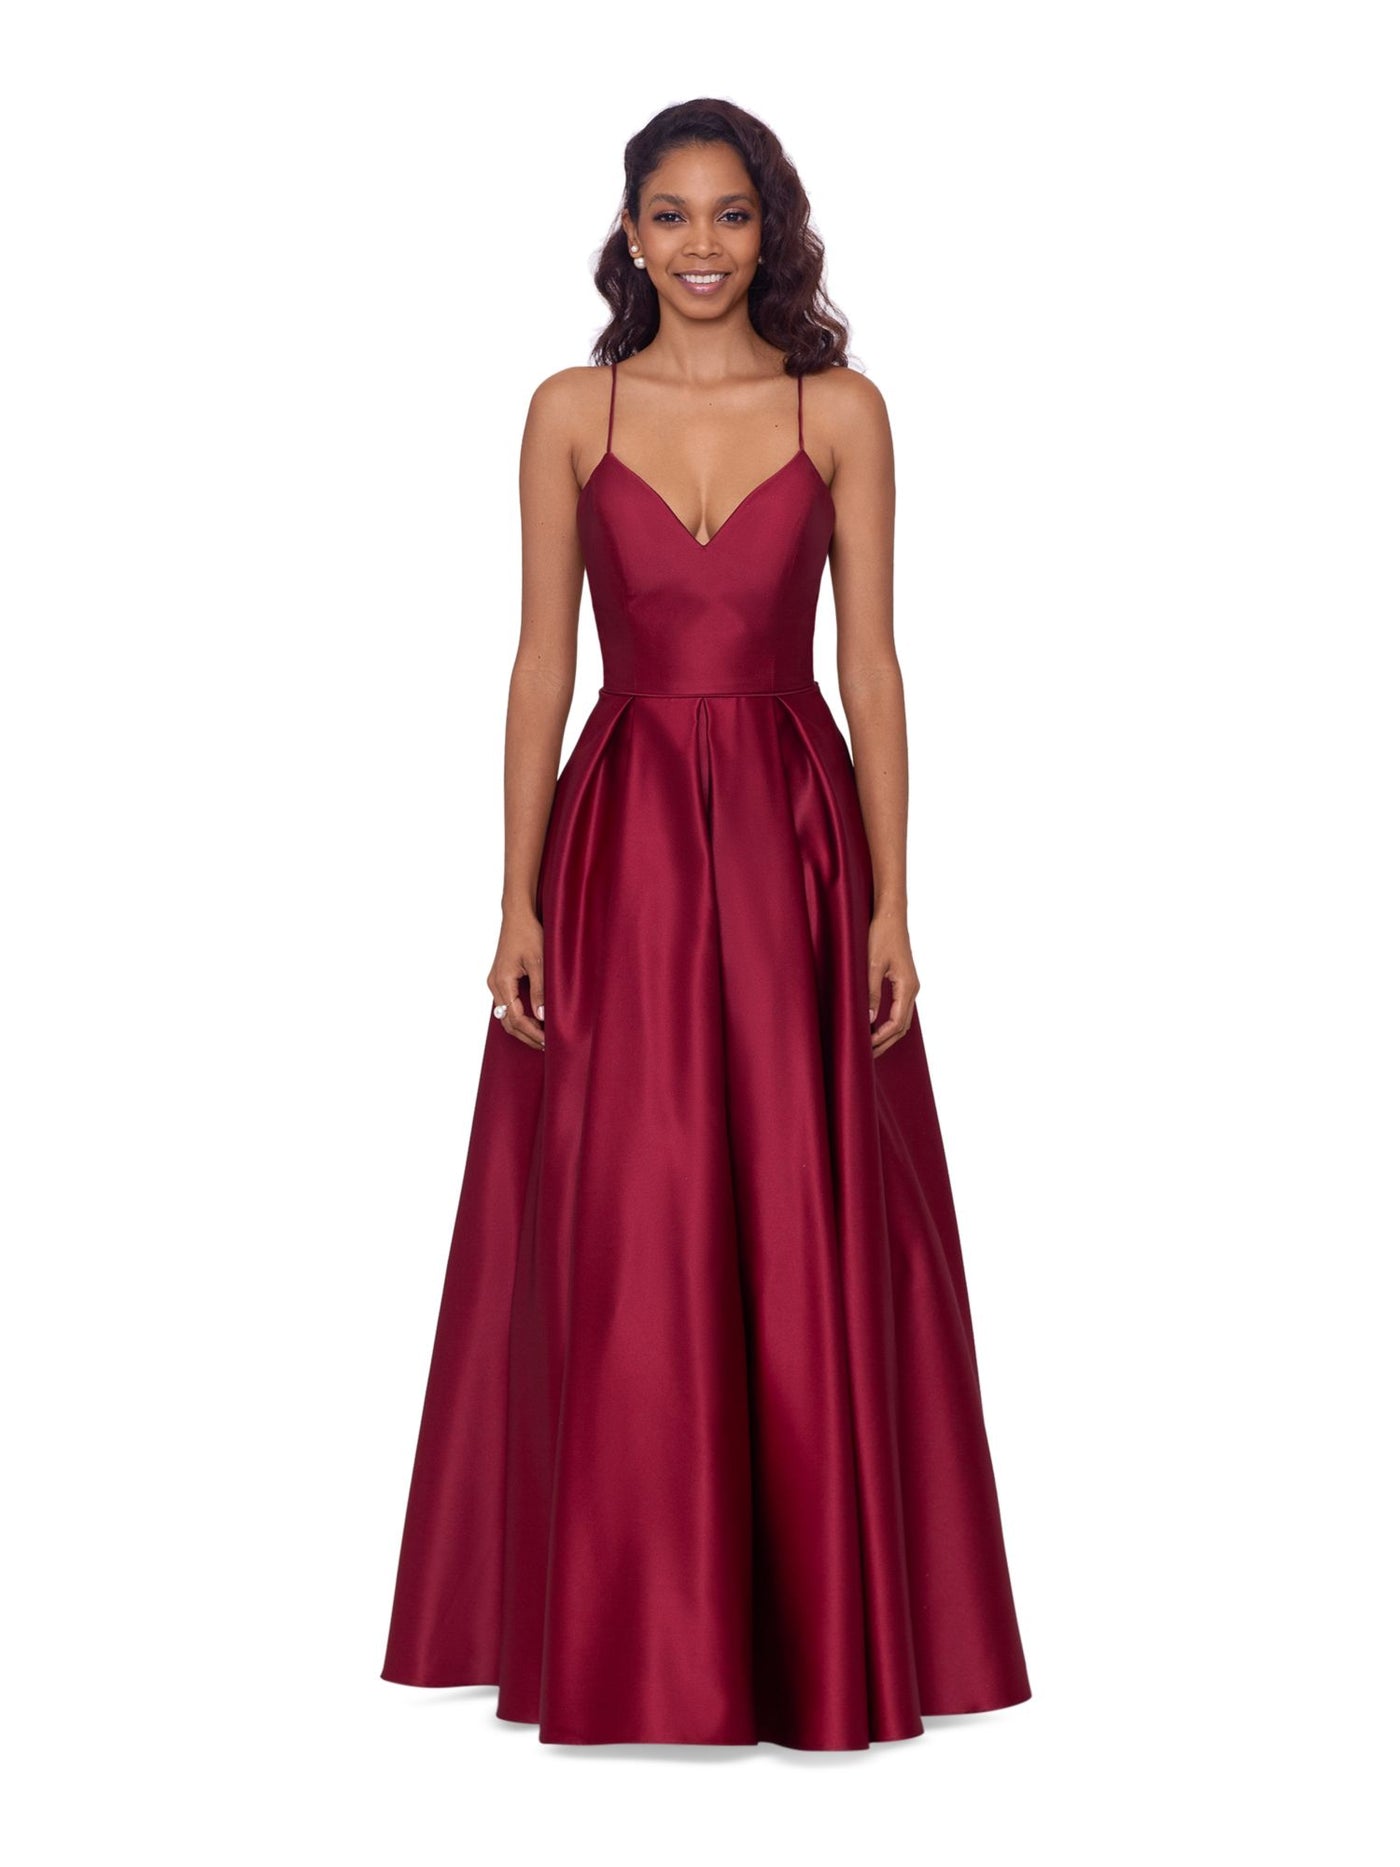 BLONDIE NITES Womens Maroon Zippered Pleated Lace-up Back Pocketed Lined Spaghetti Strap V Neck Full-Length Formal Gown Dress Juniors 3